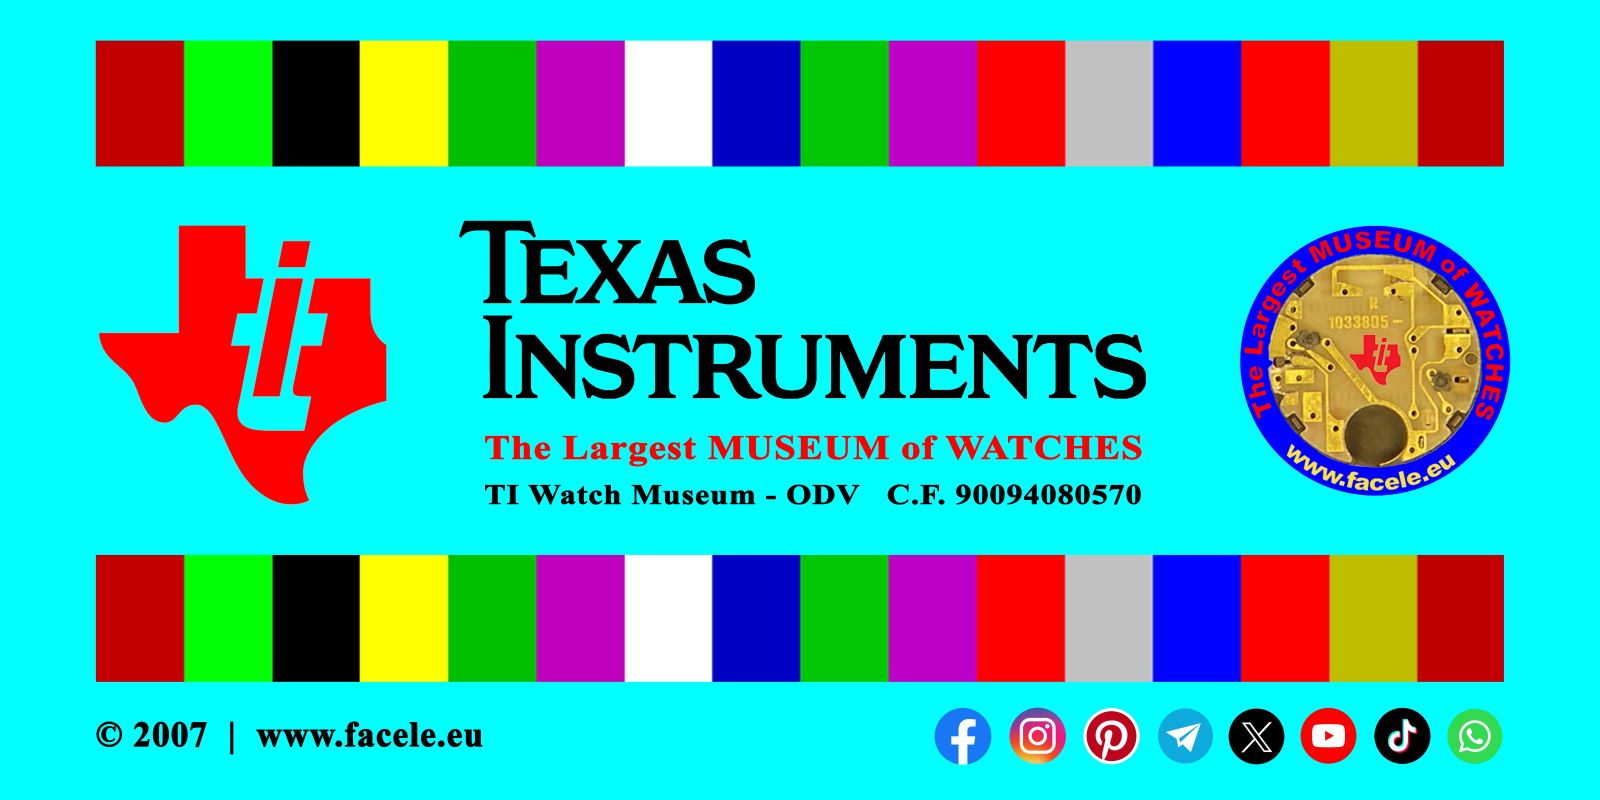 Fun and Passion for the Texas Instruments